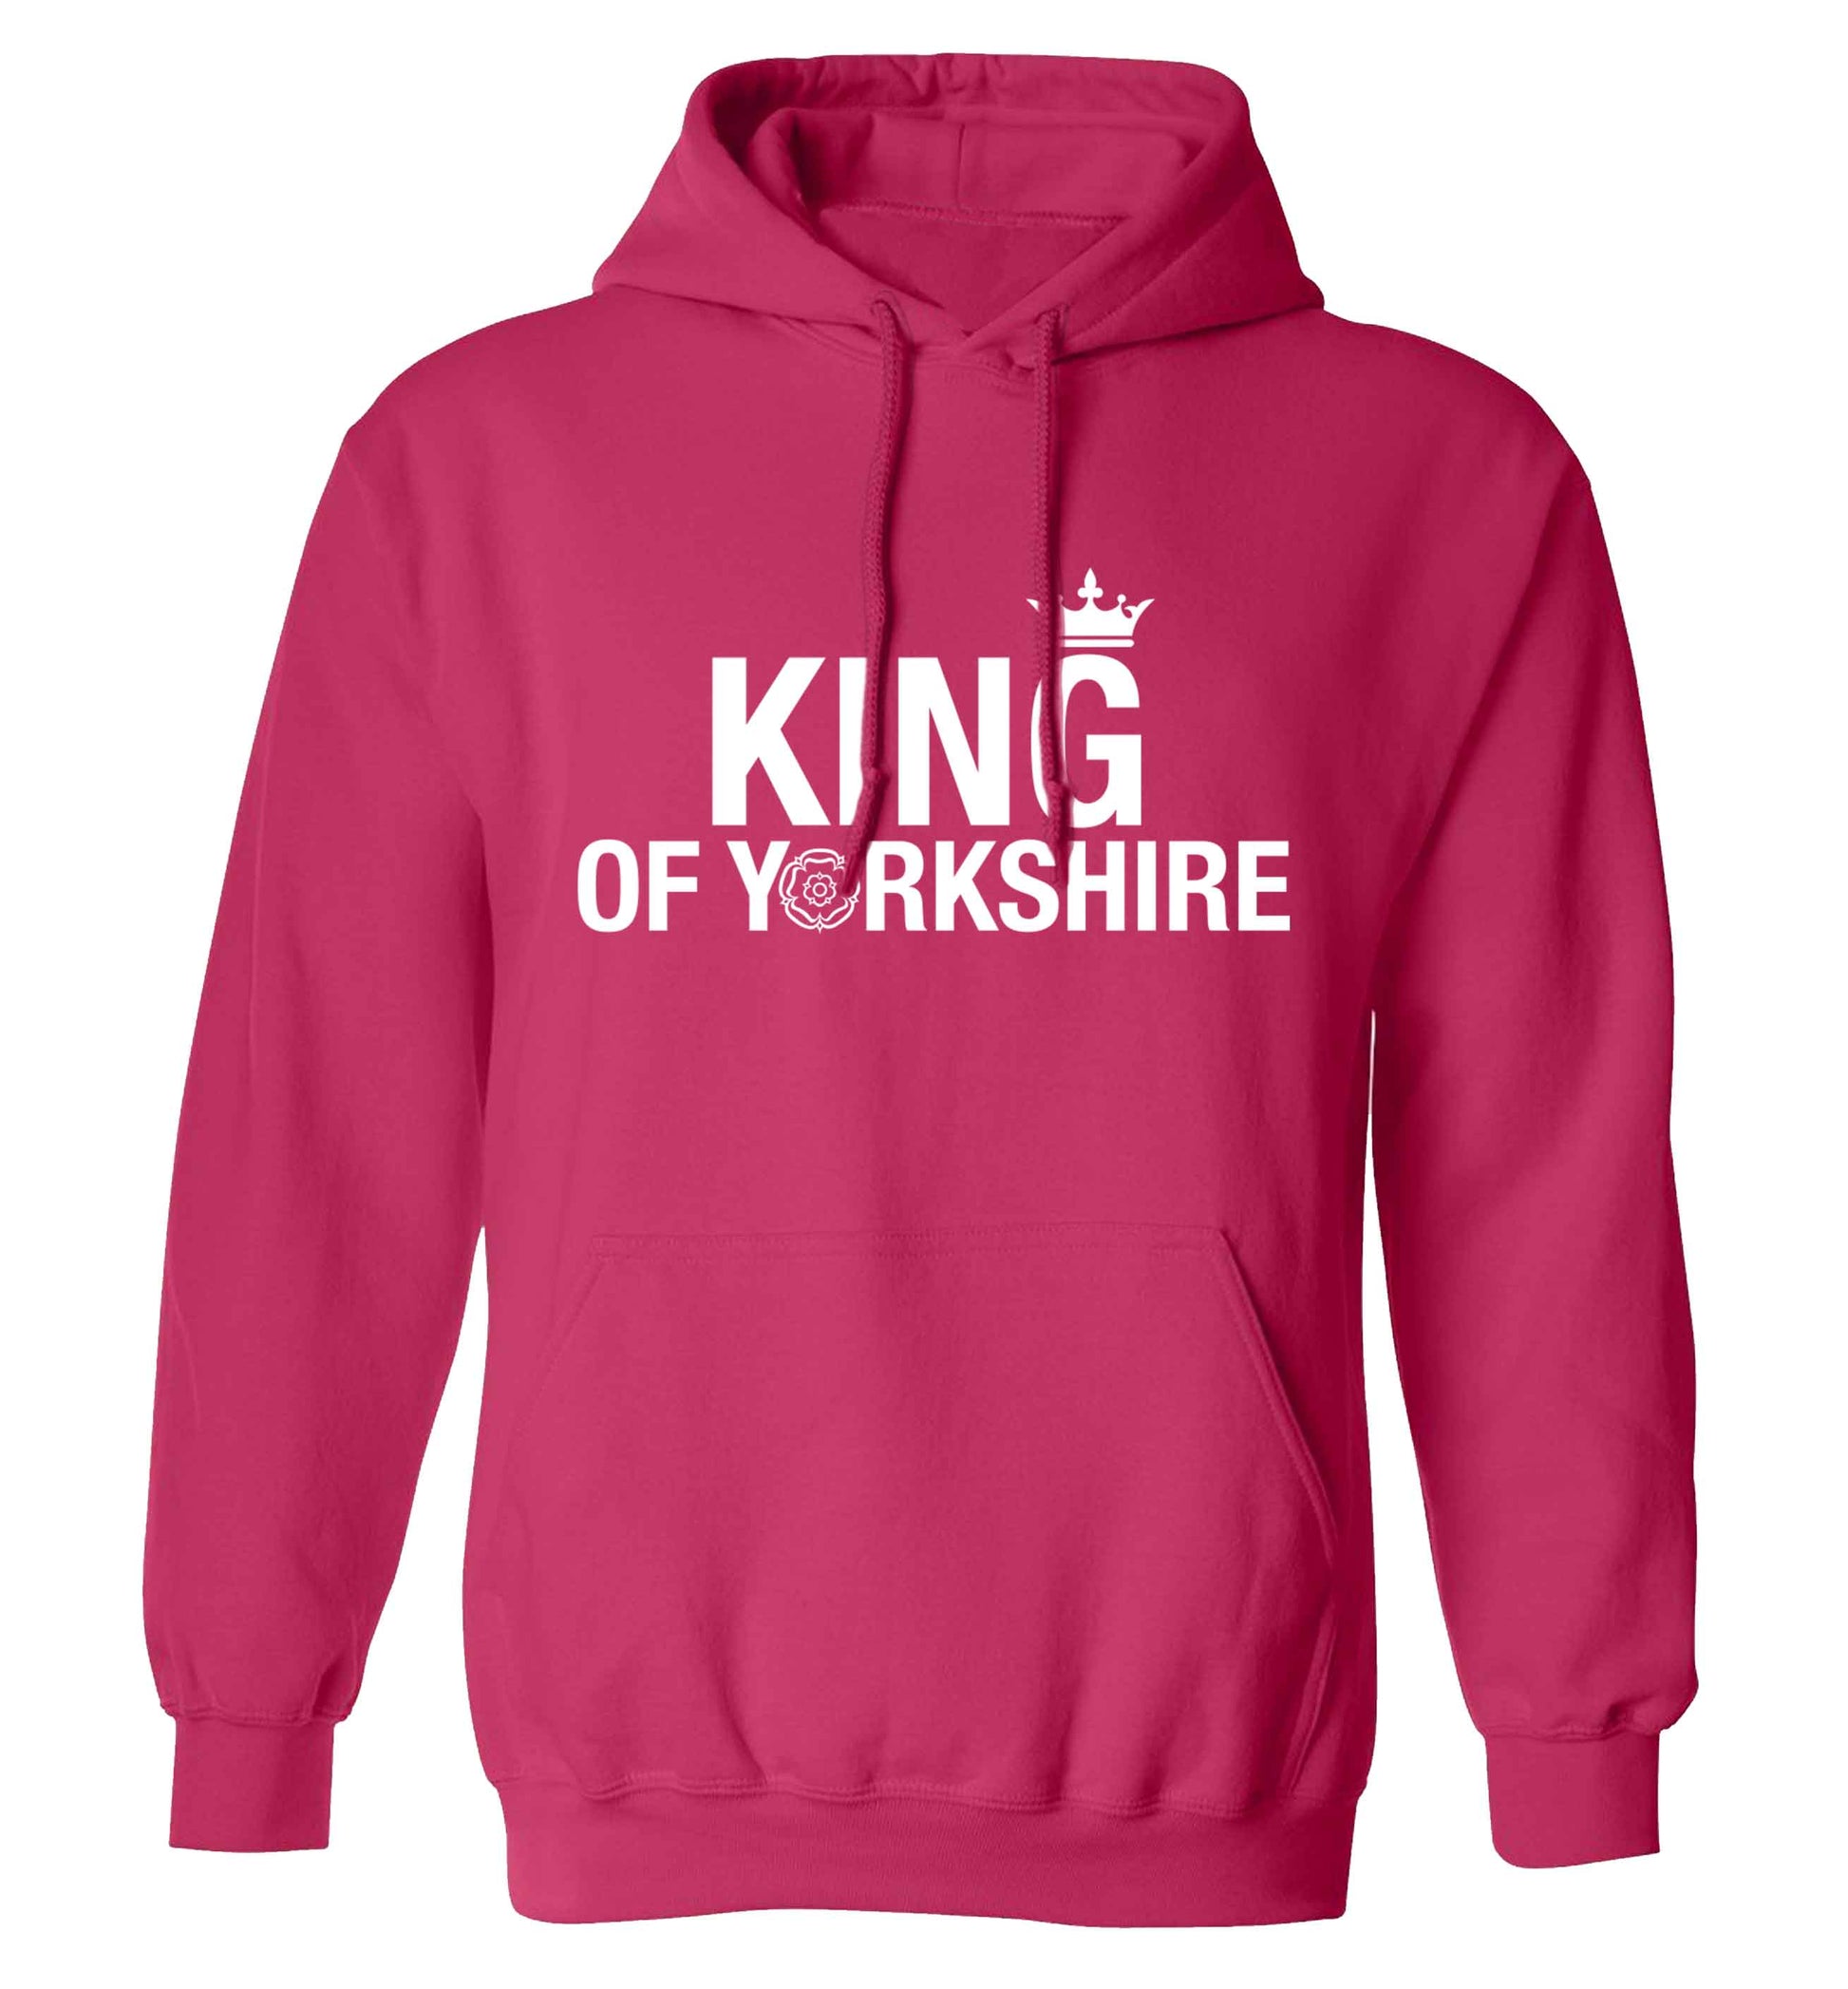 King of Yorkshire adults unisex pink hoodie 2XL